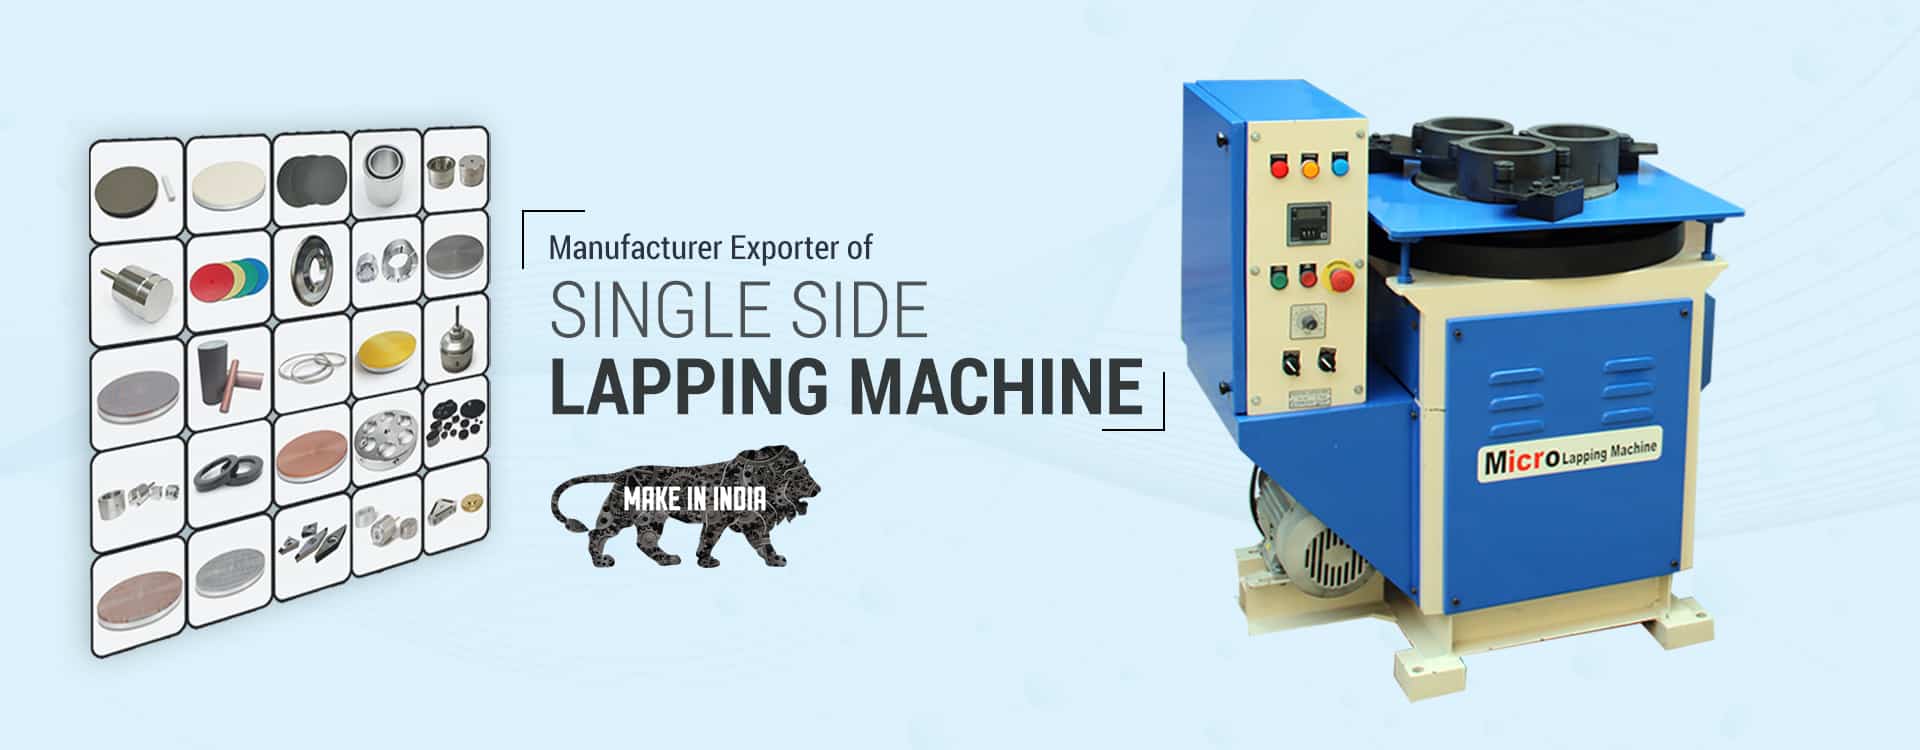 Single Side Lapping Machine Manufacturer